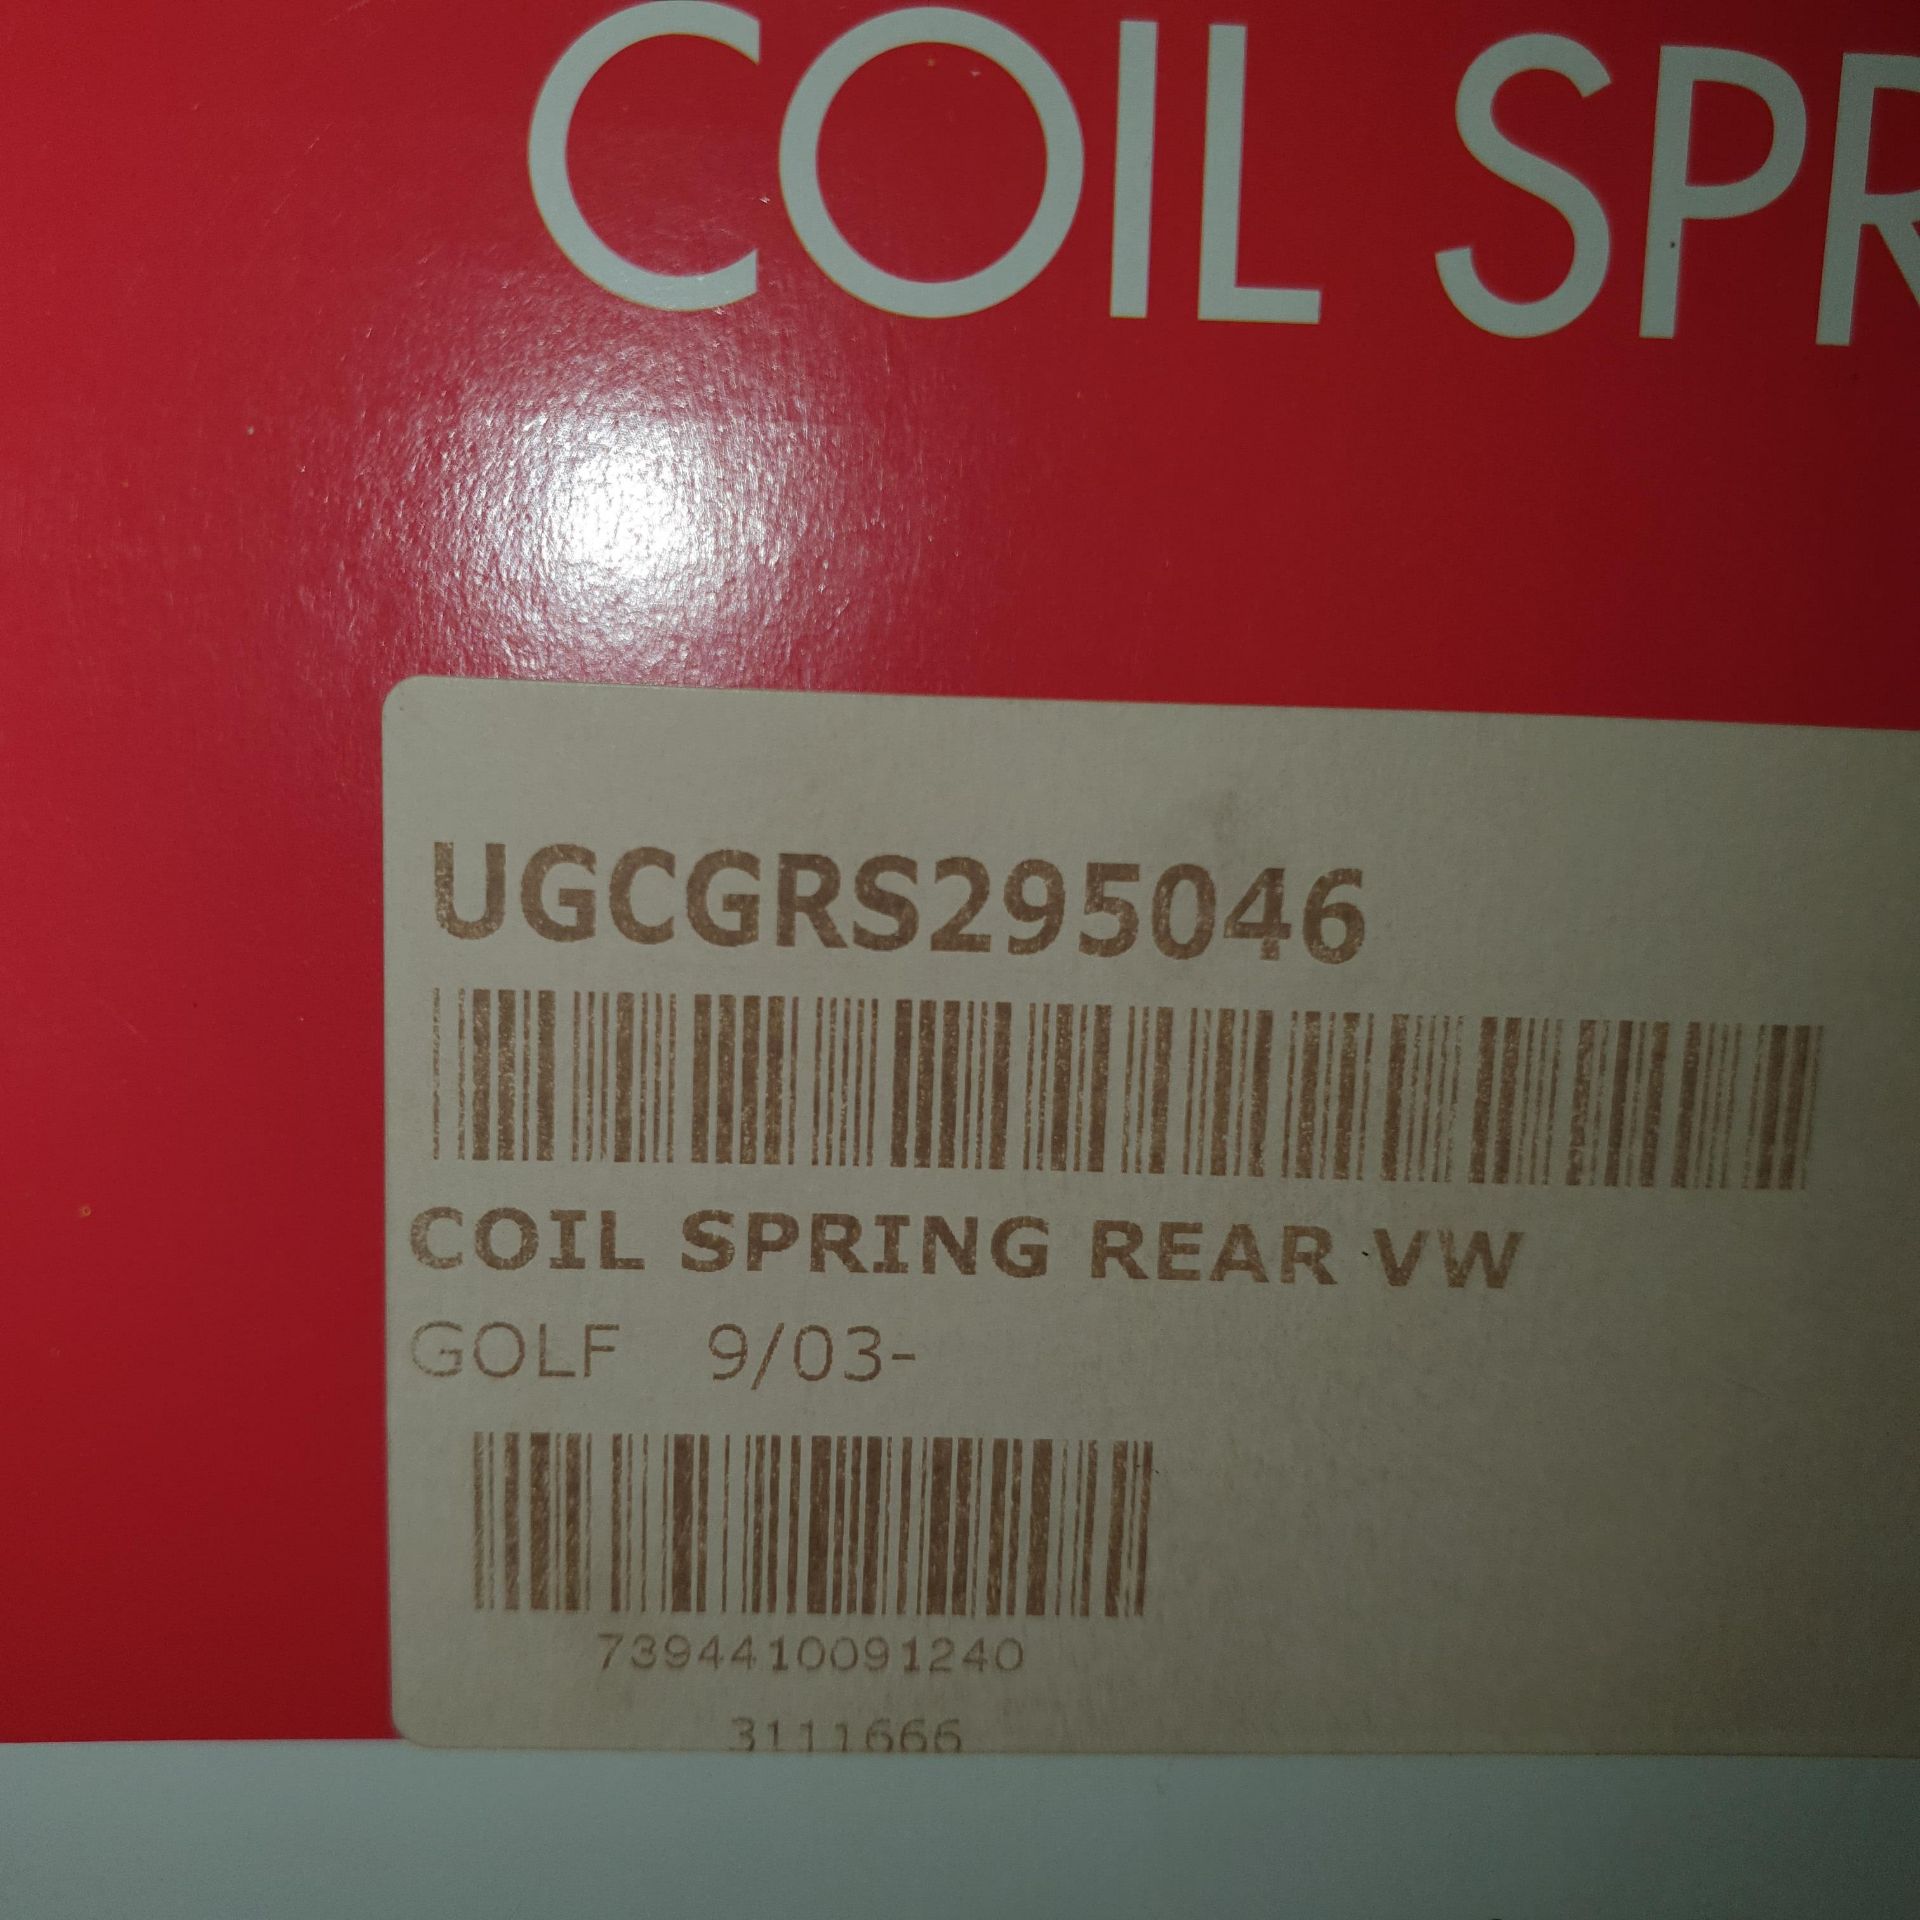 Approx. 20 Unipart Coil Springs, as set out on one - Image 2 of 3